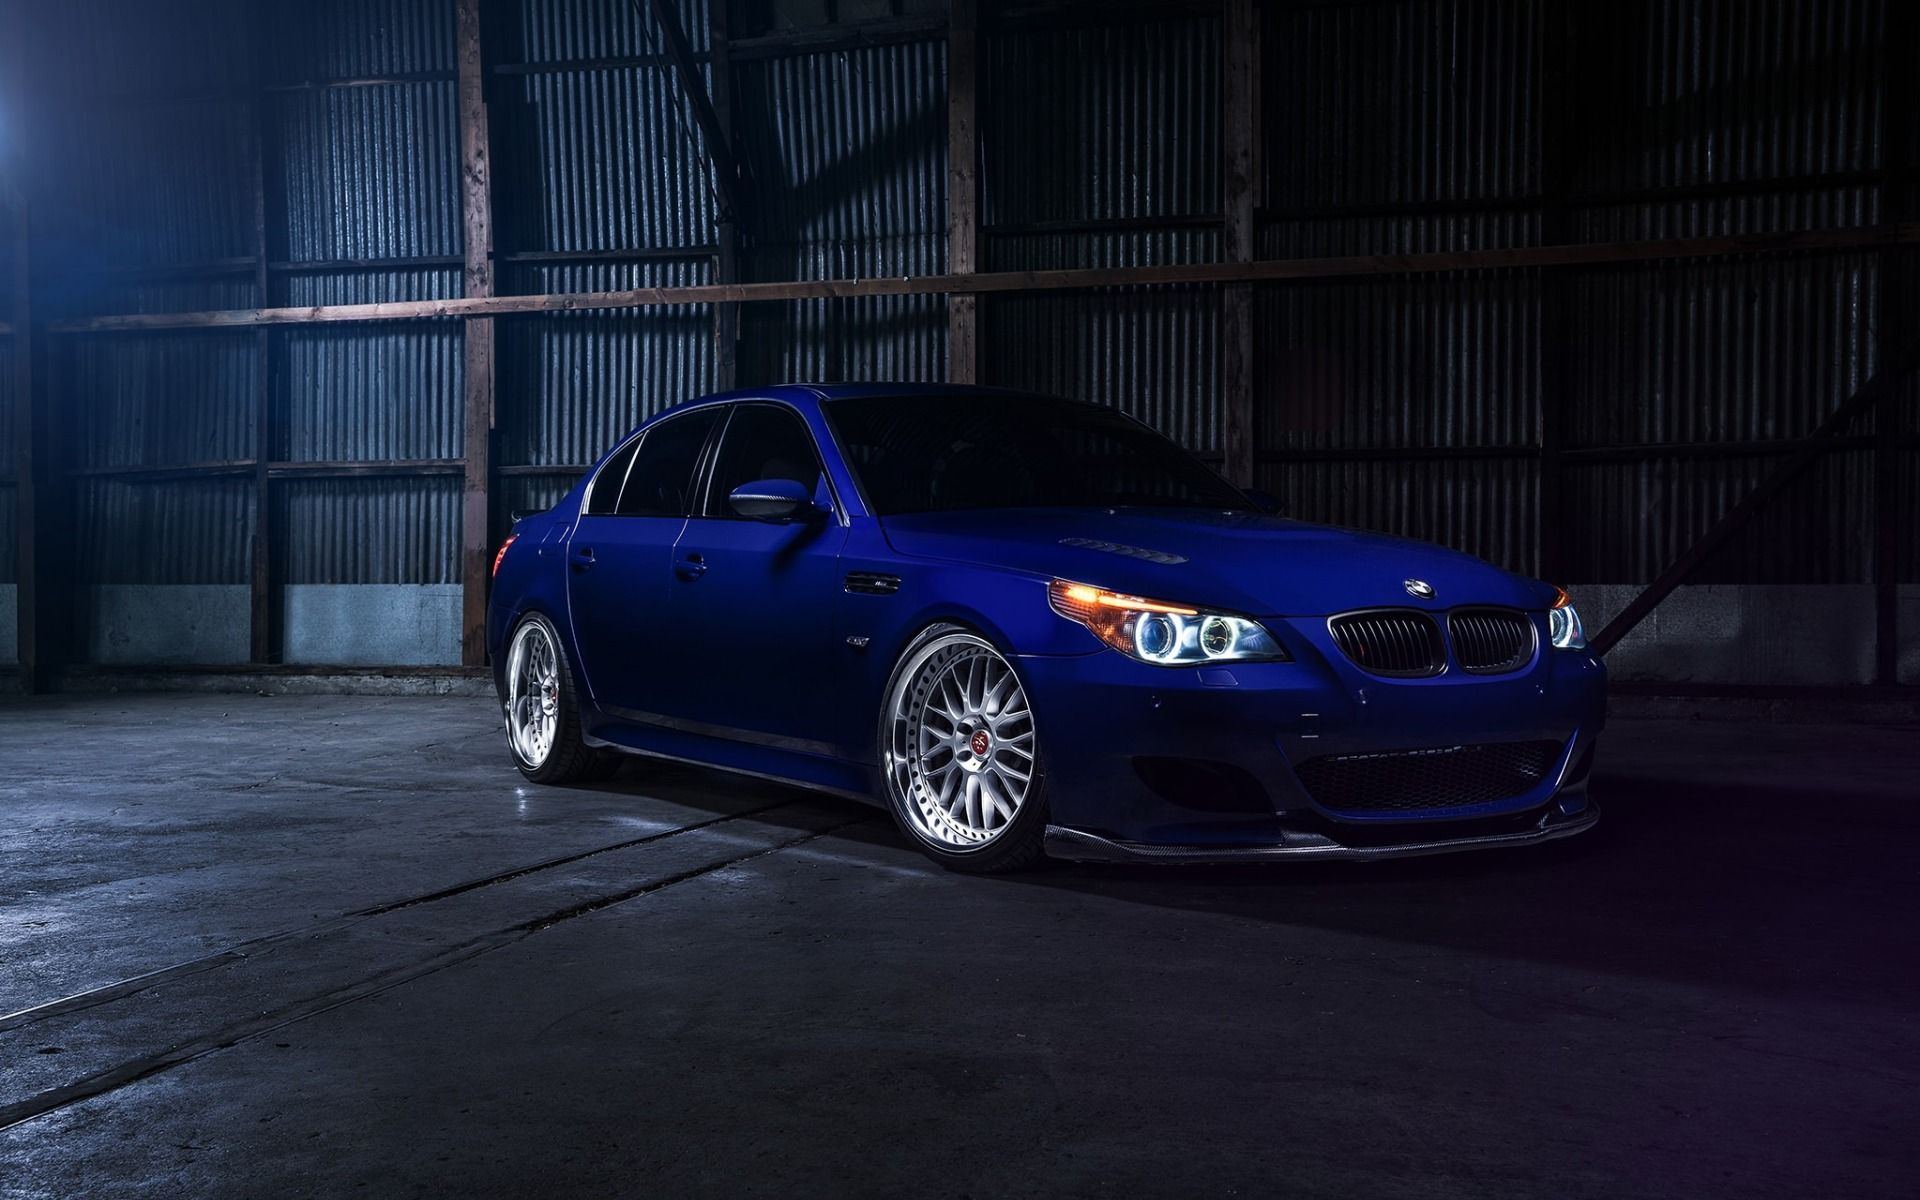 1920x1200 Download Wallpaper Bmw M5 4k E60 Blue M5 Sedan Tuning F10 Garage German Cars Bmw For Desktop With Resolution 1920x1200 High Quality Hd Picture Wallpaper